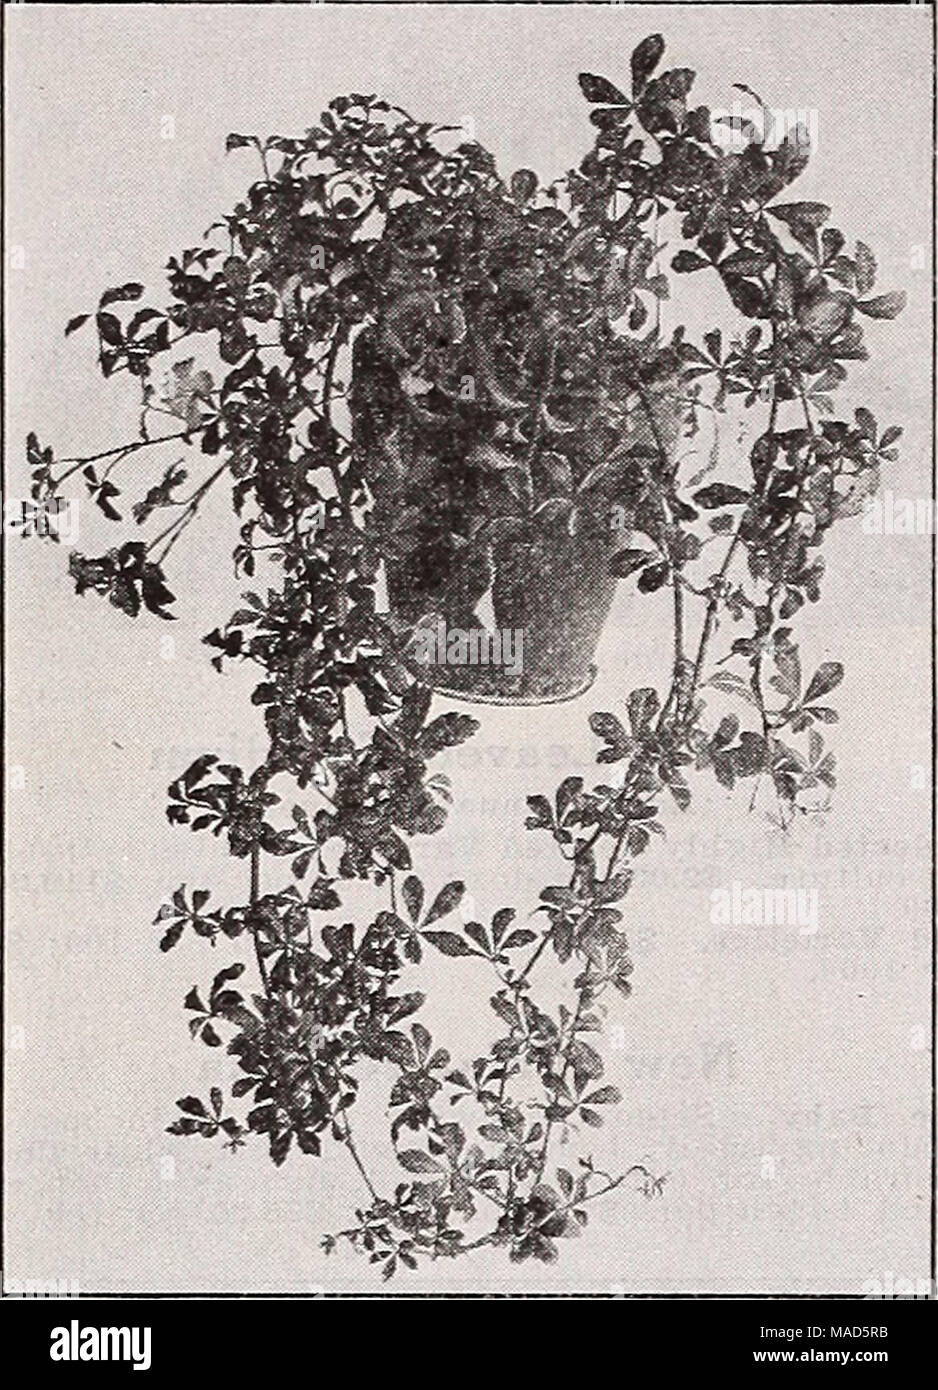 . Dreer's wholesale catalog for florists : autumn 1938 edition . Cissvis striata Striata. A very graceful and free-growing vine which shows great promise as a house plant. The small leaves are 3 to 5 foliate and the whole plant has the appearance of a miniature-leaved Vitis rhombifolia. Strong 2-inch pot plants §1.50 per doz.; $10.00 per 100. Clerodendron Balfonri. 4-inch pots 60c each; $8.00 per doz. Cryptanthus Rosea picta. Very desirable for small dish work. 2%- inch pots $2.50 per doz.; $15.00 per 100. Cyperus Alternifolius. 4-inch pots $3.00 per doz.: $20.00 per 100. Stock Photo